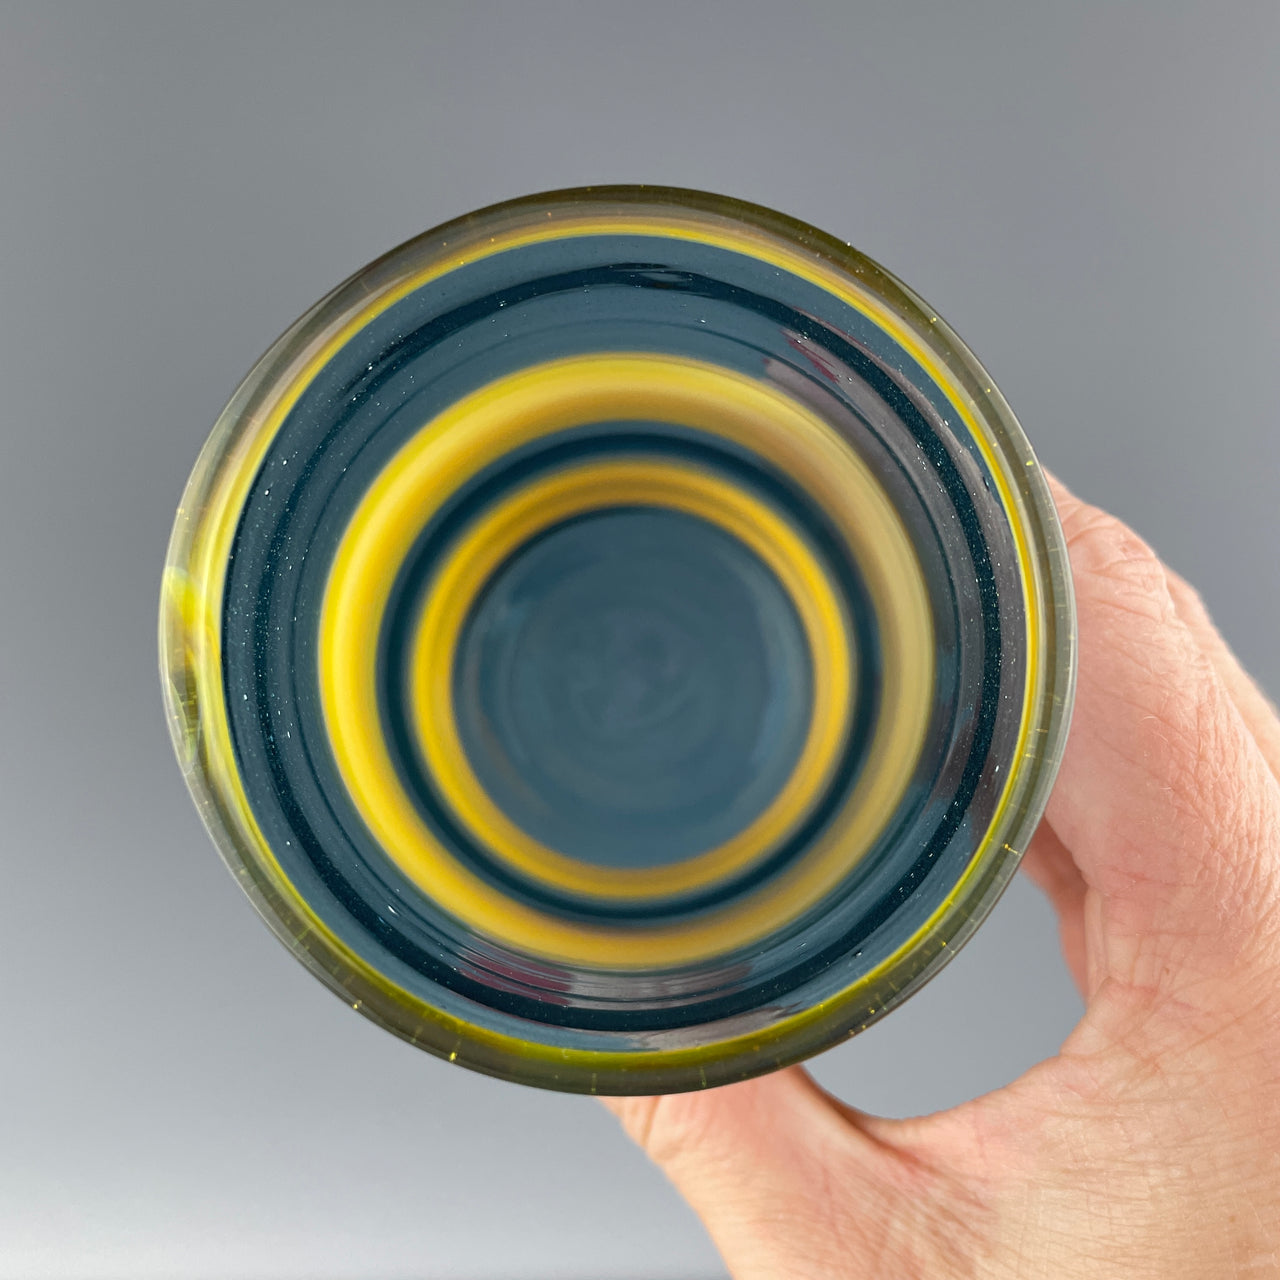 inside of a blue and yellow striped cup